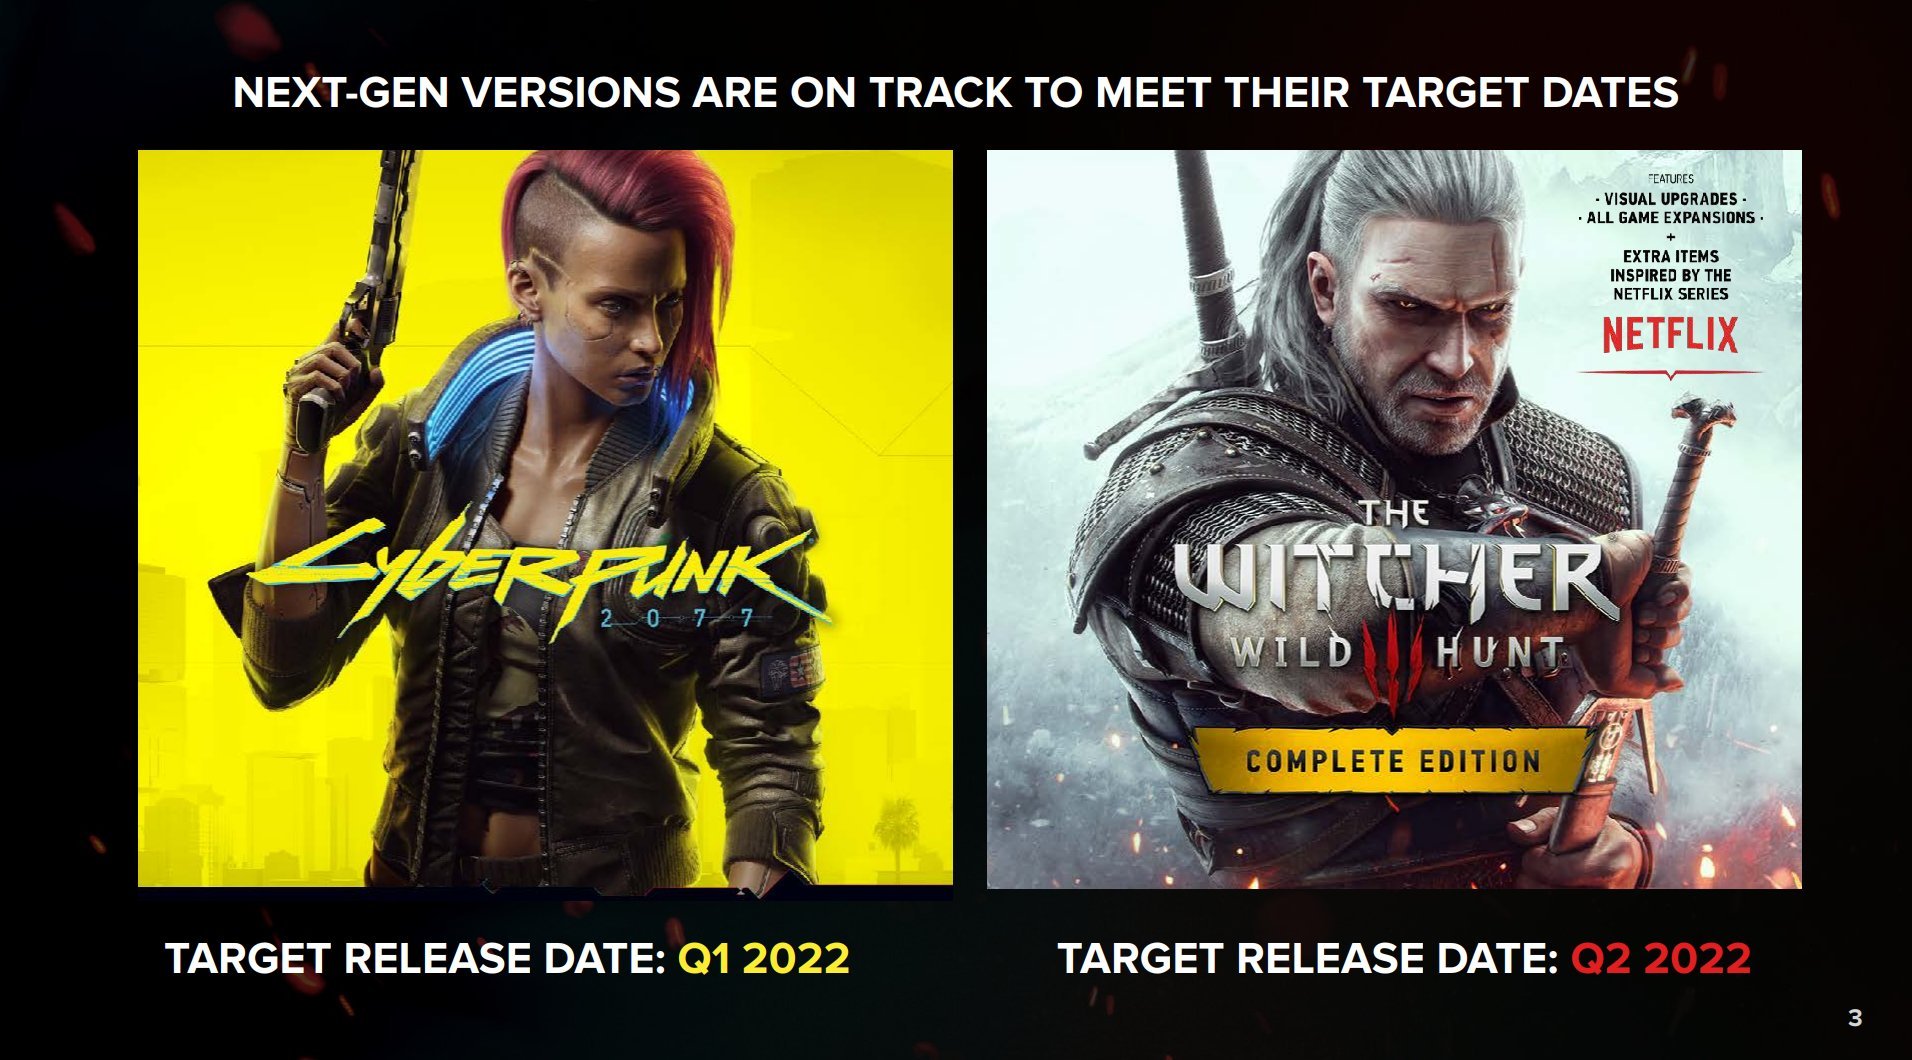 CD Projekt Red shares new details about next-gen 'Cyberpunk 2077' and 'The  Witcher 3' versions | GBAtemp.net - The Independent Video Game Community